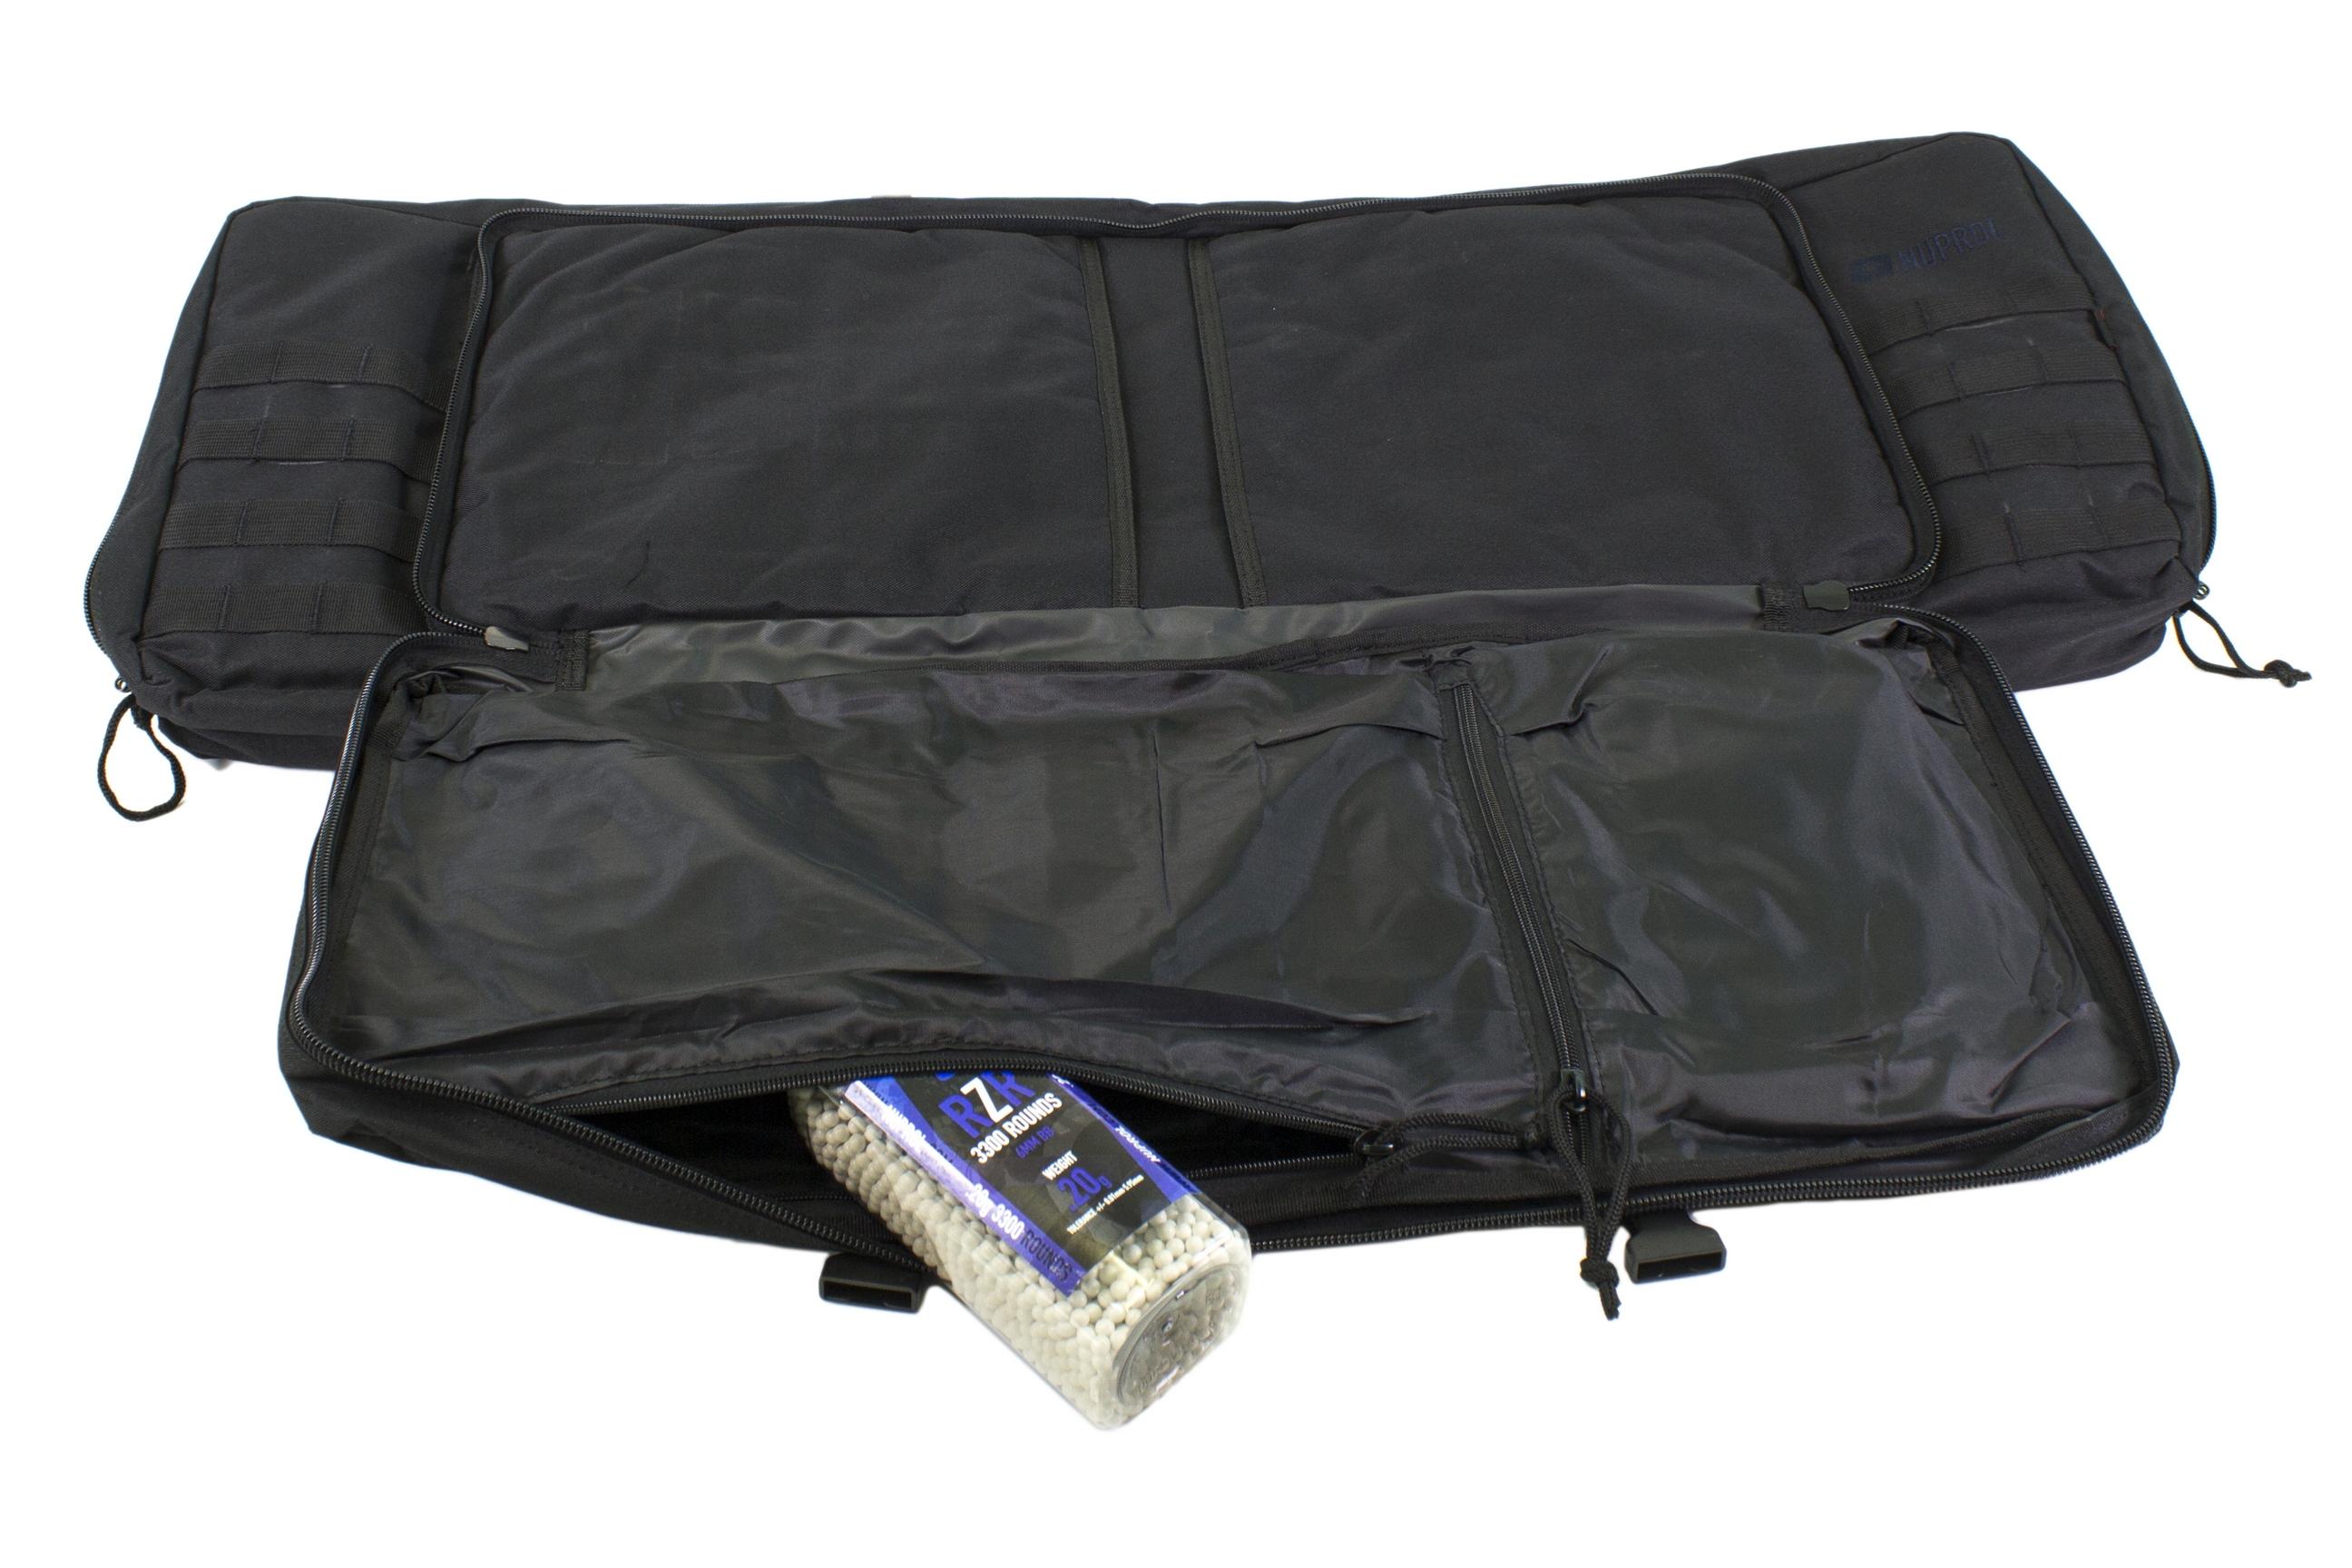 NUPROL NP Soft Riffle Bag PMC Deluxe  42"